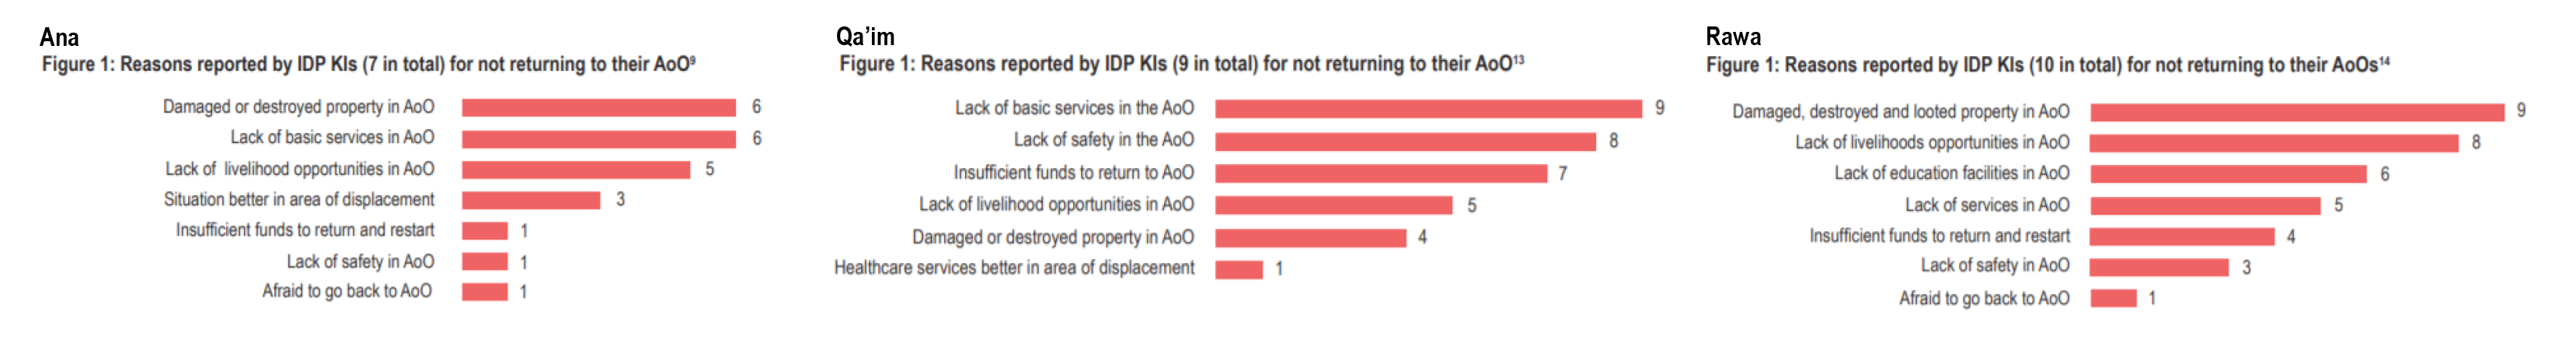 Reasons given by internally displaced people or IDPs from Ana, Qa'im and Rawa for not returning to their area of origin. 